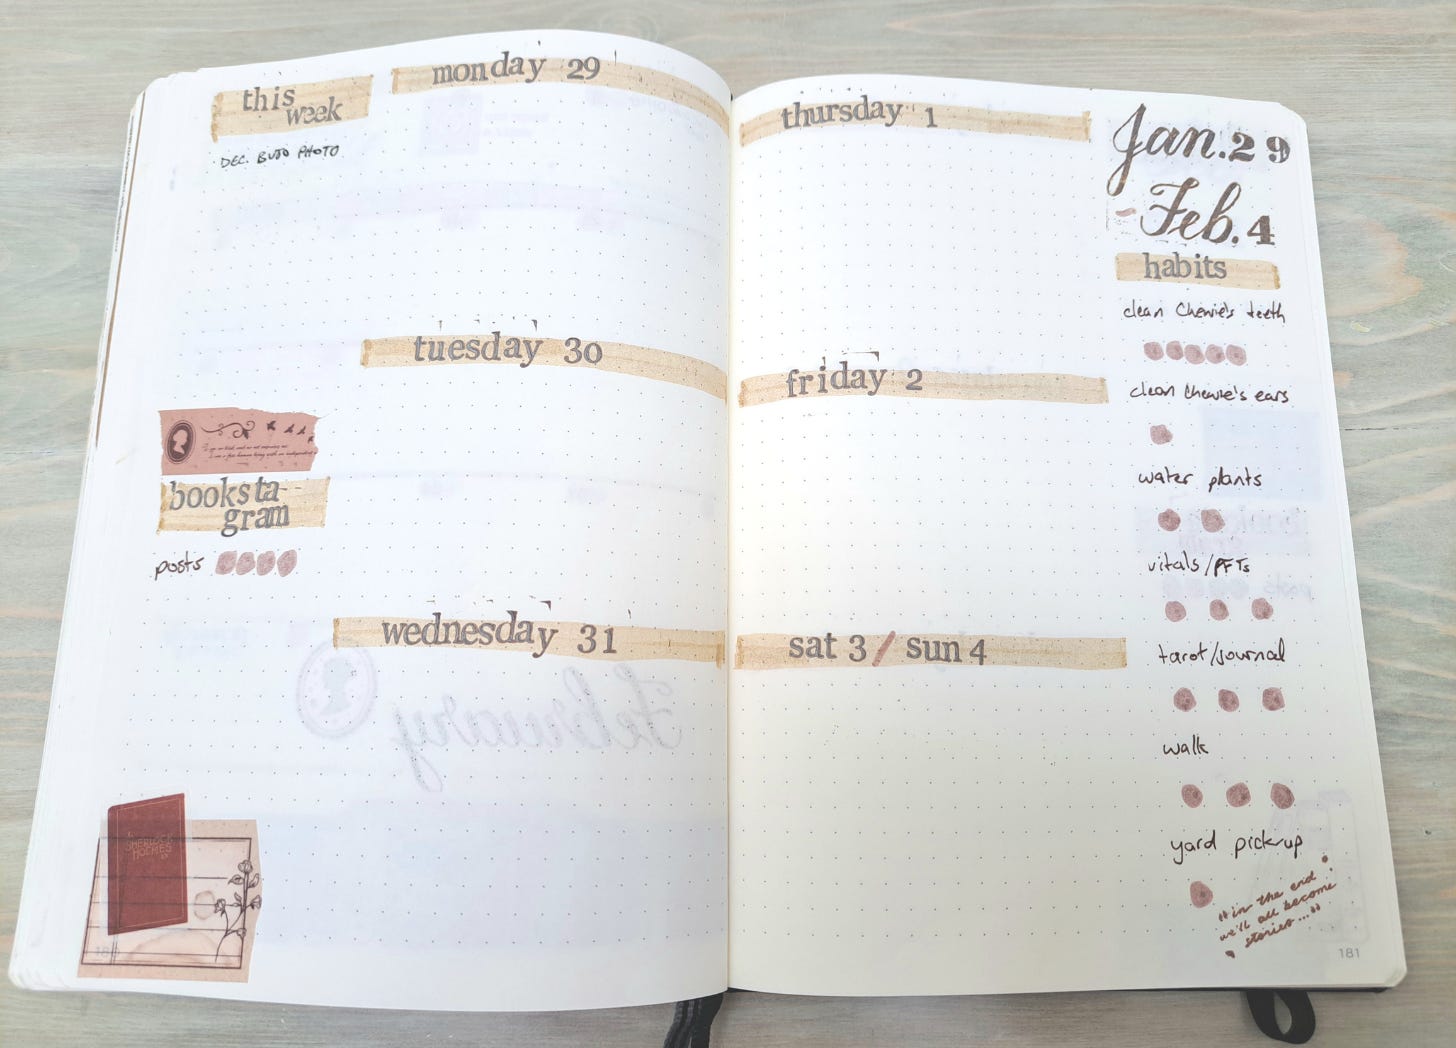 Weekly spread in notebook with days of the week, a to-do list, and a place to track habits.